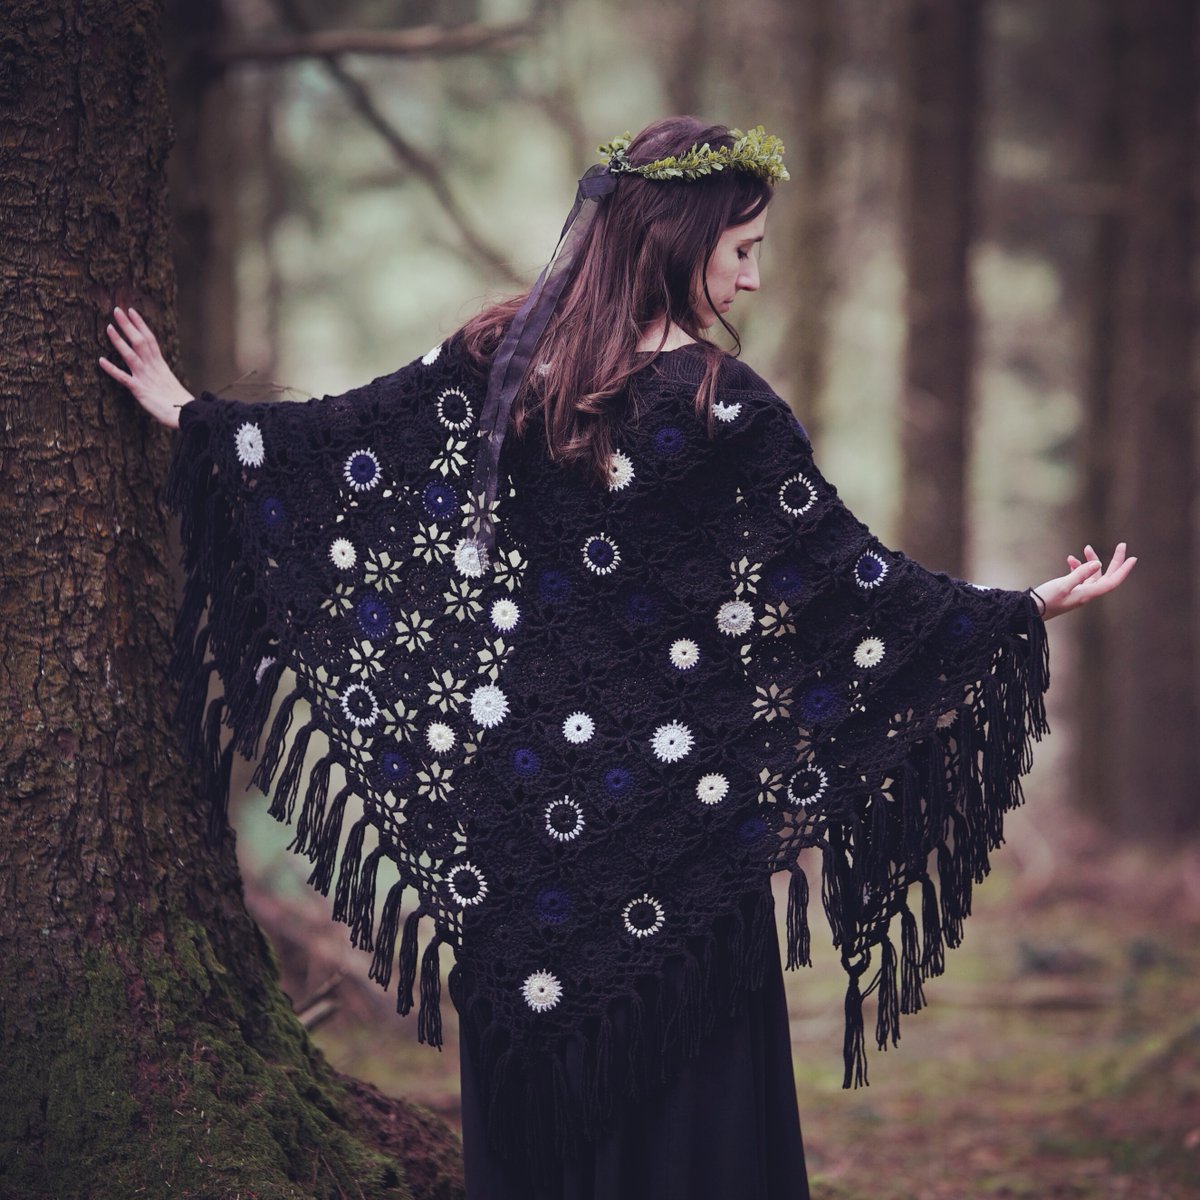 Stars and moons and celestial sparkles ... ✨🖤🌒🌕🌘🖤✨
If this new shawl calls to you, pop over to Esty and take a look 😊
etsy.com/uk/listing/114…

#cosmicwitch #moongoddess #celestialenergy #hecate #daughtersofhecate #Witch